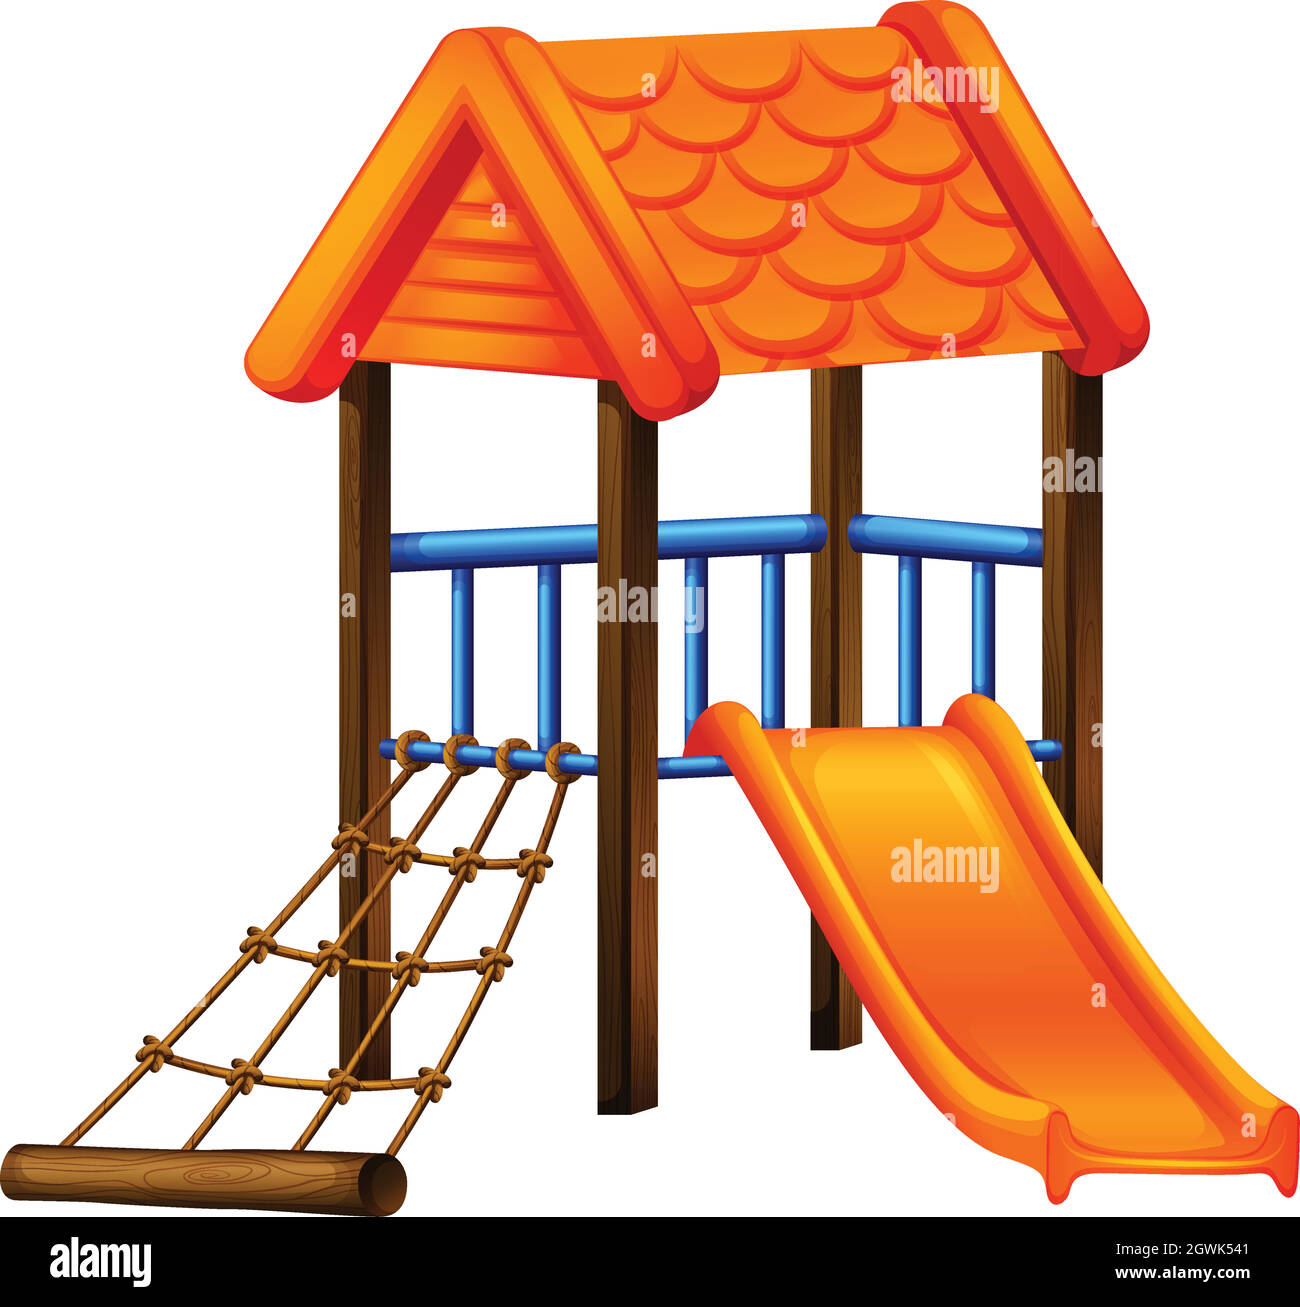 A play area at the park Stock Vector